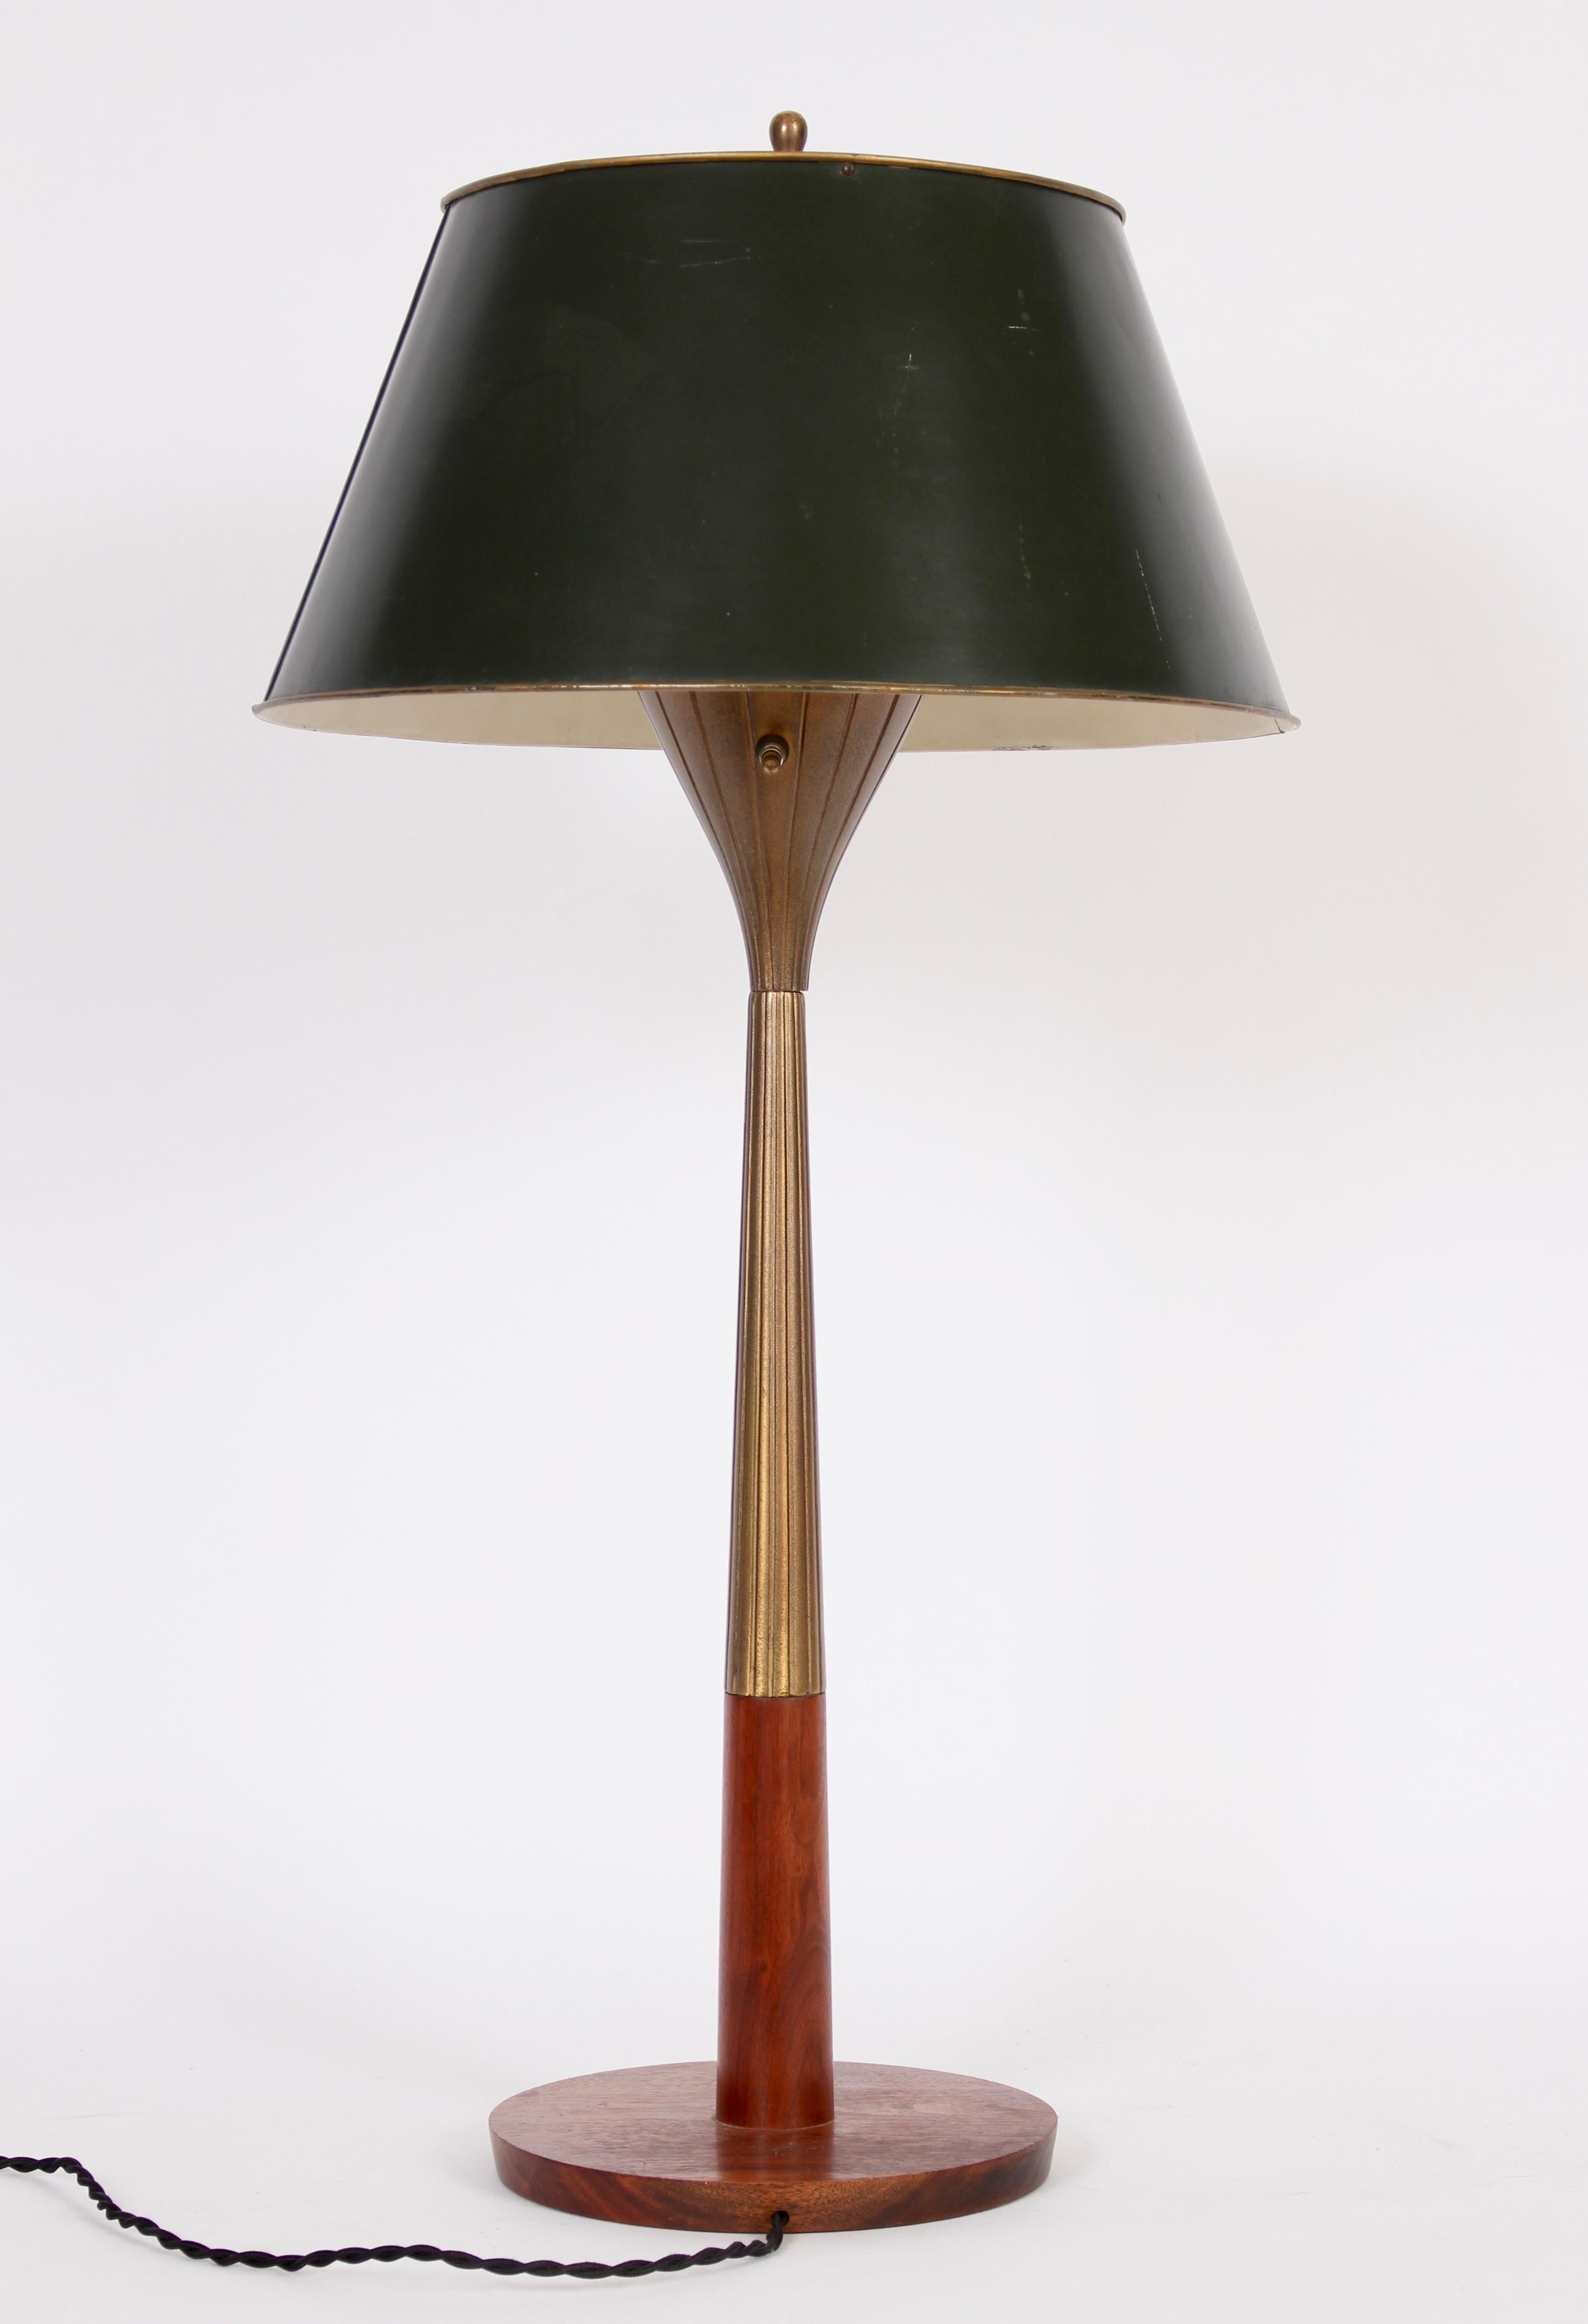 Gerald Thurston for Lightolier 3' H flared and incised brass and walnut table lamp, circa 1960. Featuring a radiating vertically lined antique bronzed finish top and partial stem with a Walnut finished lower stem and round solid Walnut base. With